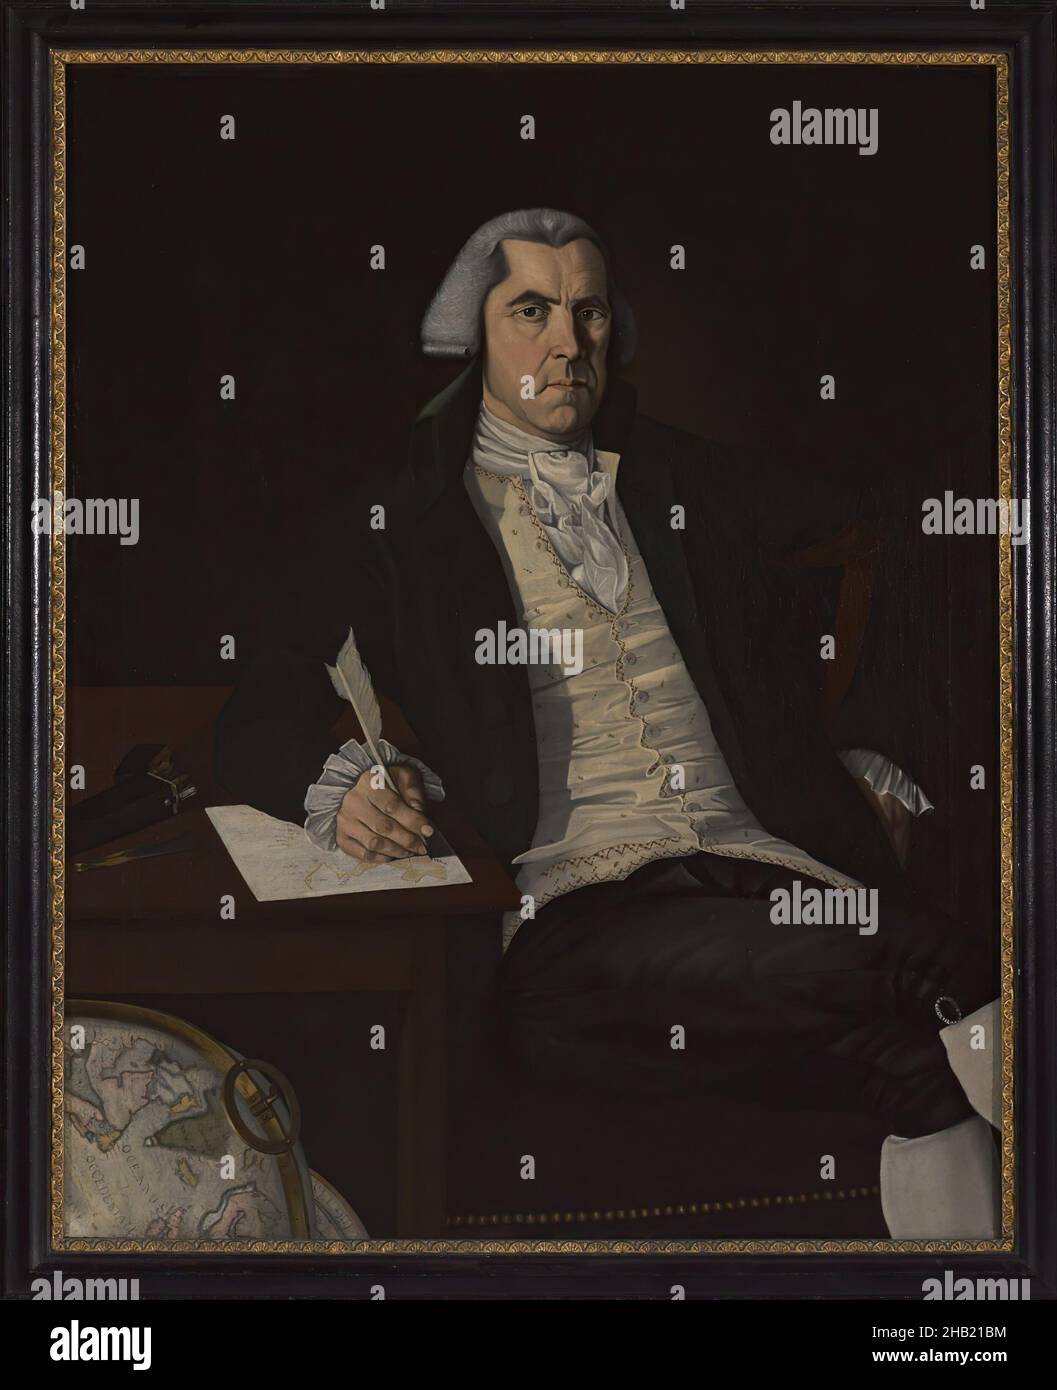 John Vinall, John Mason Furness, American, 1763-1804, Oil on canvas, ca. 1792, 49 5/16 x 39 7/16 in., 125.2 x 100.2 cm, at desk, ca. 1792, feather pen, globe, letter, male, oil, painting, portrait, quill, streaming light, white man, wig, writing, x-ray Stock Photo